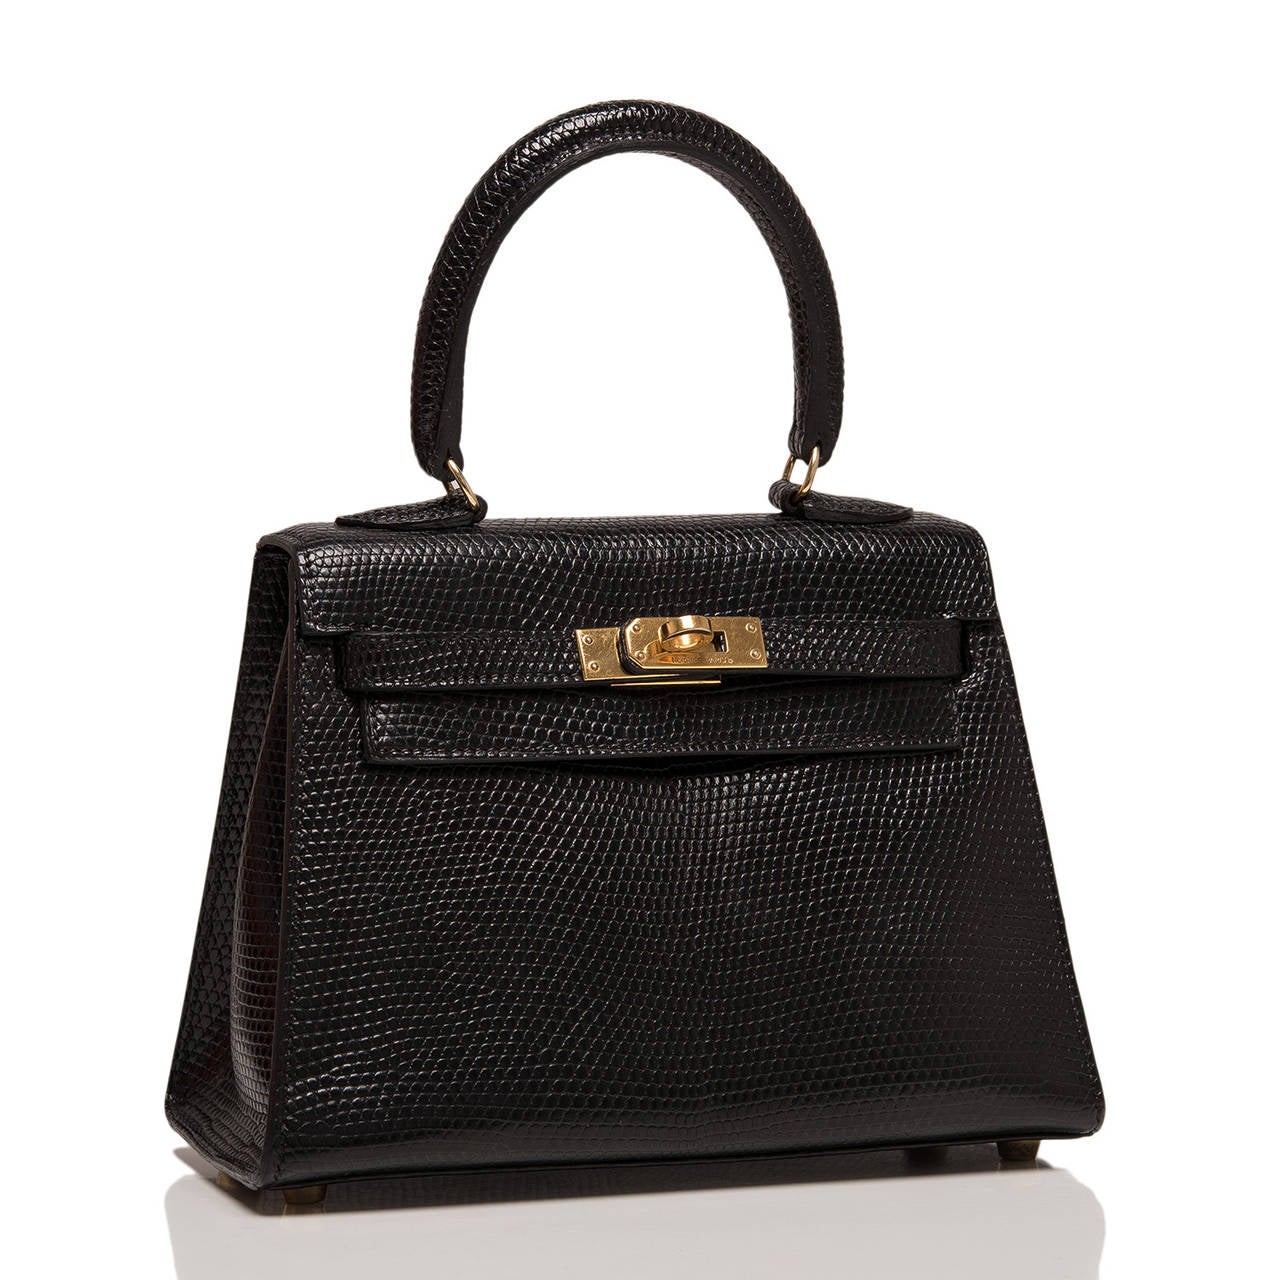 Hermes Black Kelly 20cm in luxurious lizard skin with gold hardware.

This rare mini 20cm kelly in luxurious black lizard has just returned from Hermes' spa and is beautiful with its gold hardware.

This Hermes Kelly features tonal stitching,